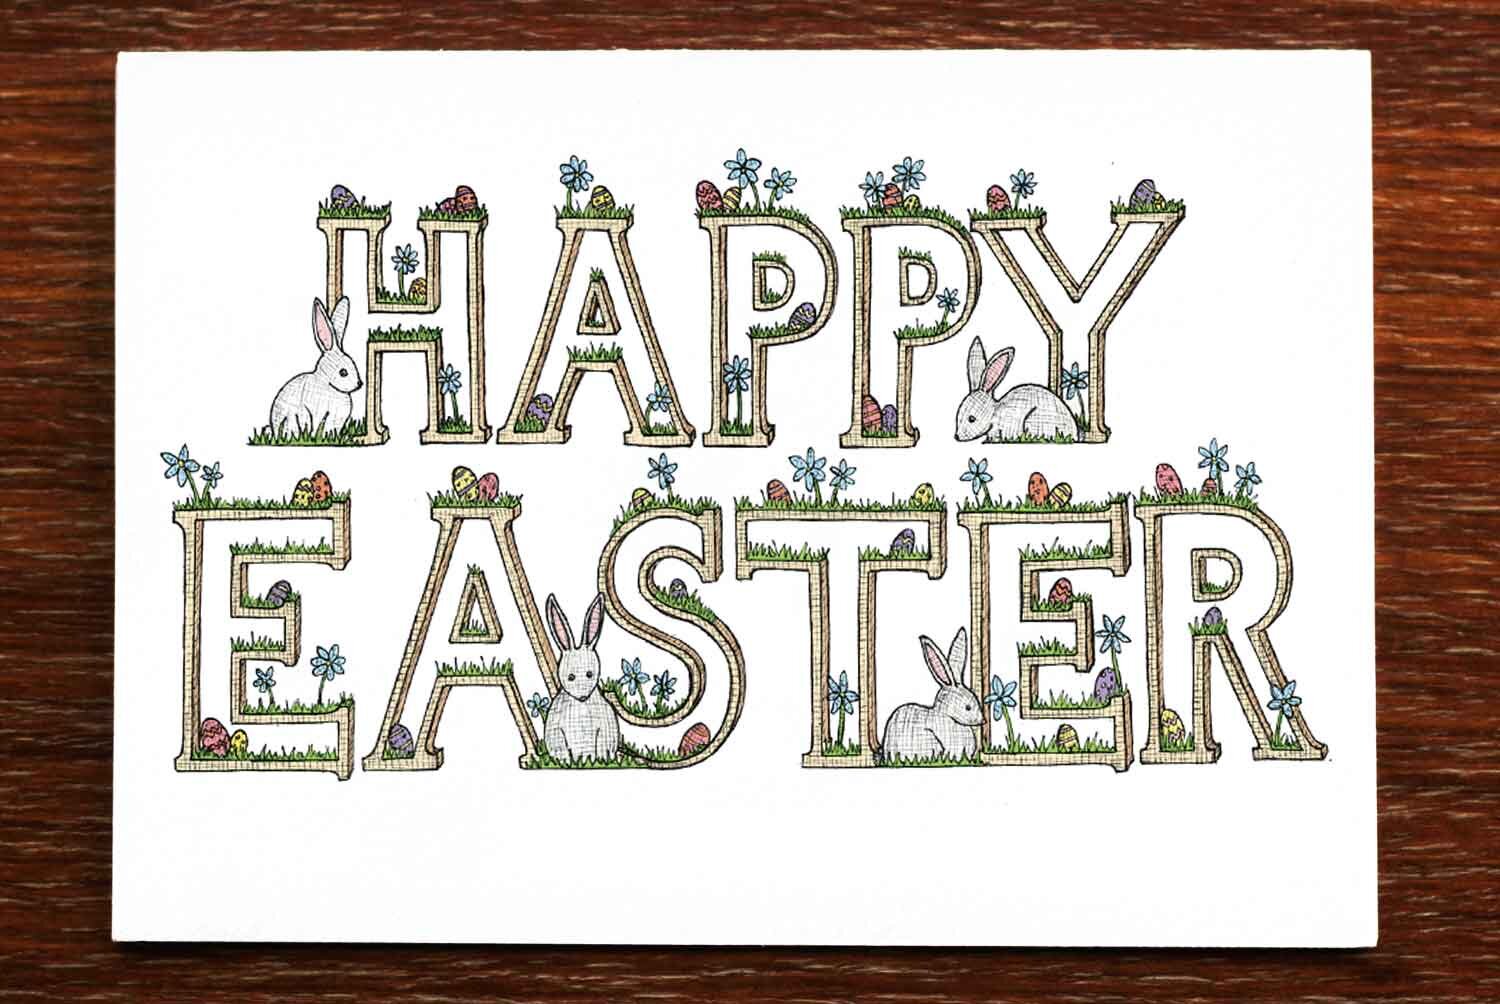 Happy Easter - Easter Greeting Card